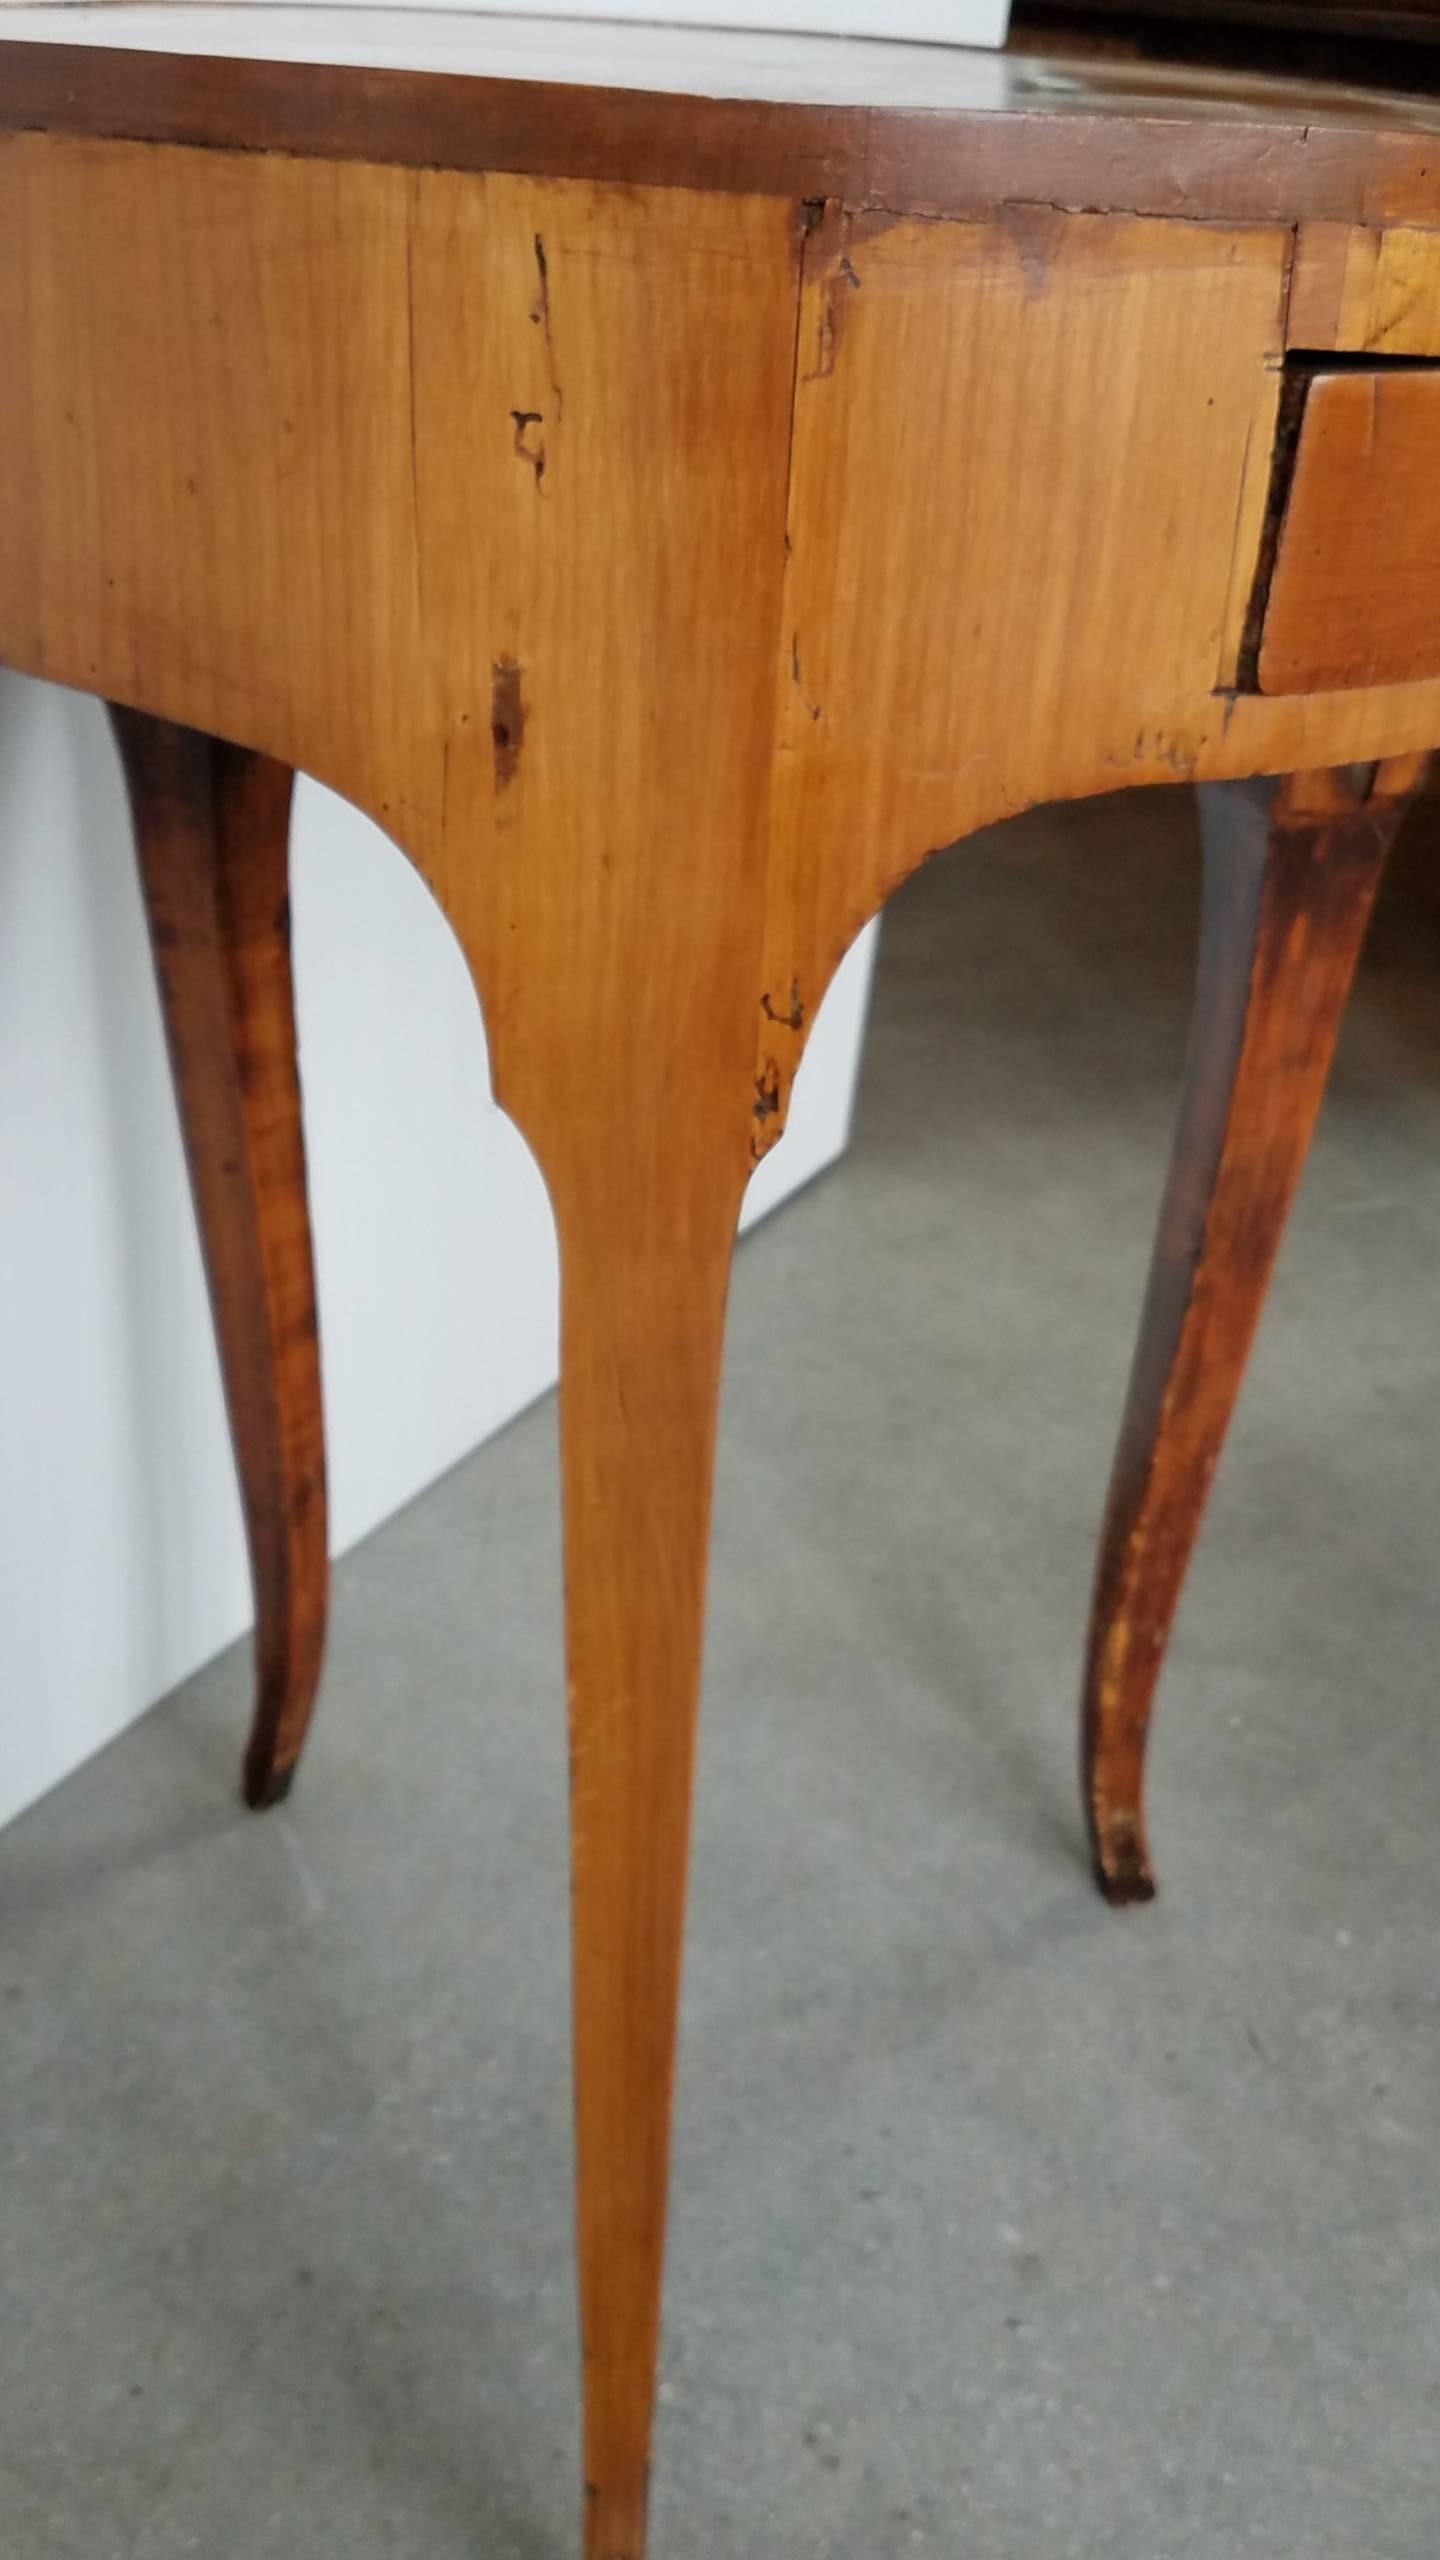 This antique French side table has the most deftly crafted top resembling a tree trunk section with its slices of inlay fanned out in a circle and tacked with tiny tack nails. The color is less red than in many of the photos and is in good